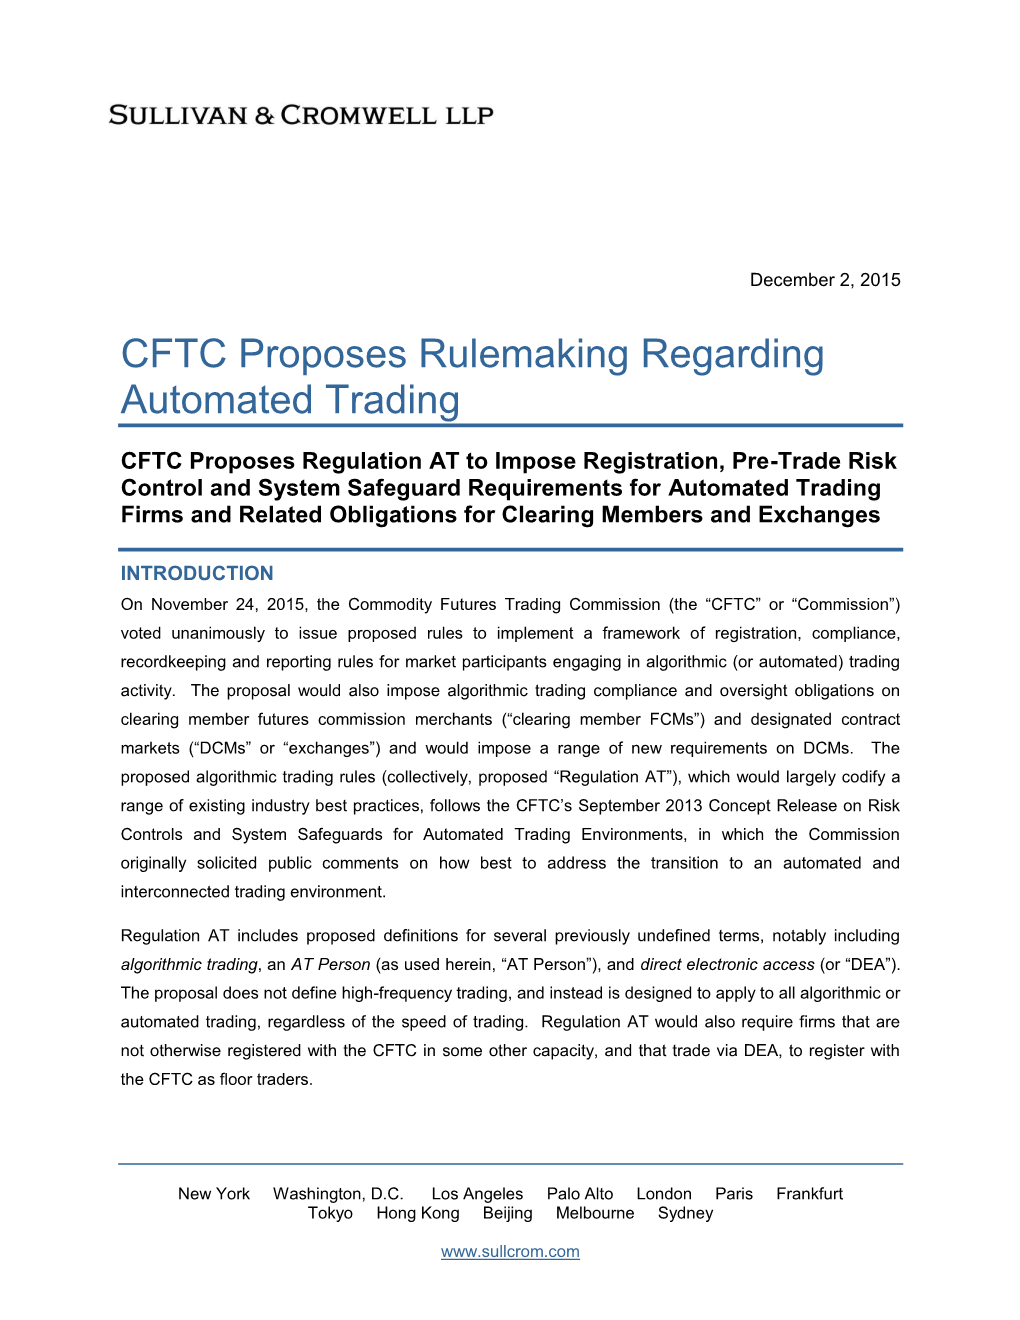 CFTC Proposes Rulemaking Regarding Automated Trading